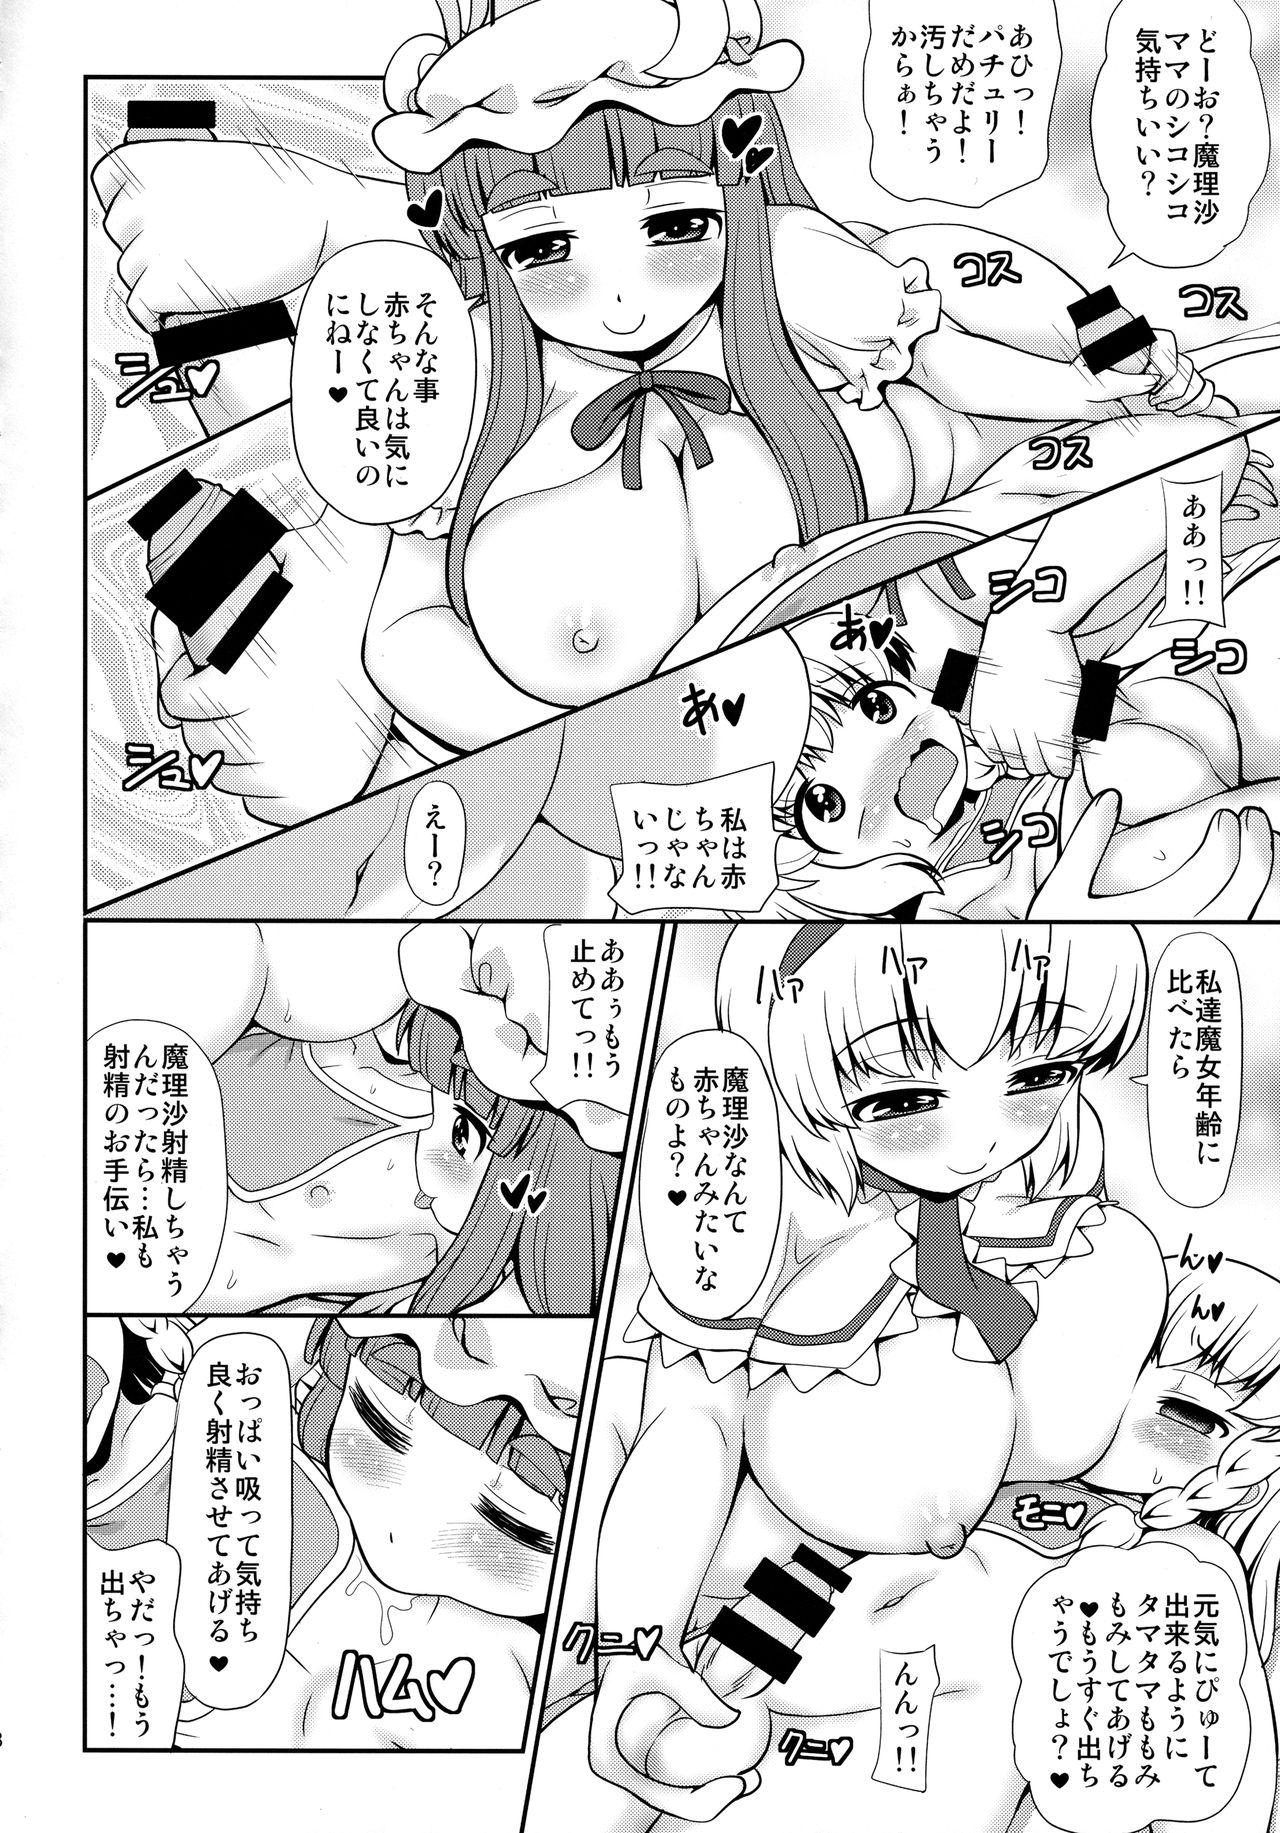 Softcore Black or Kinshi - Touhou project Nasty Porn - Page 7